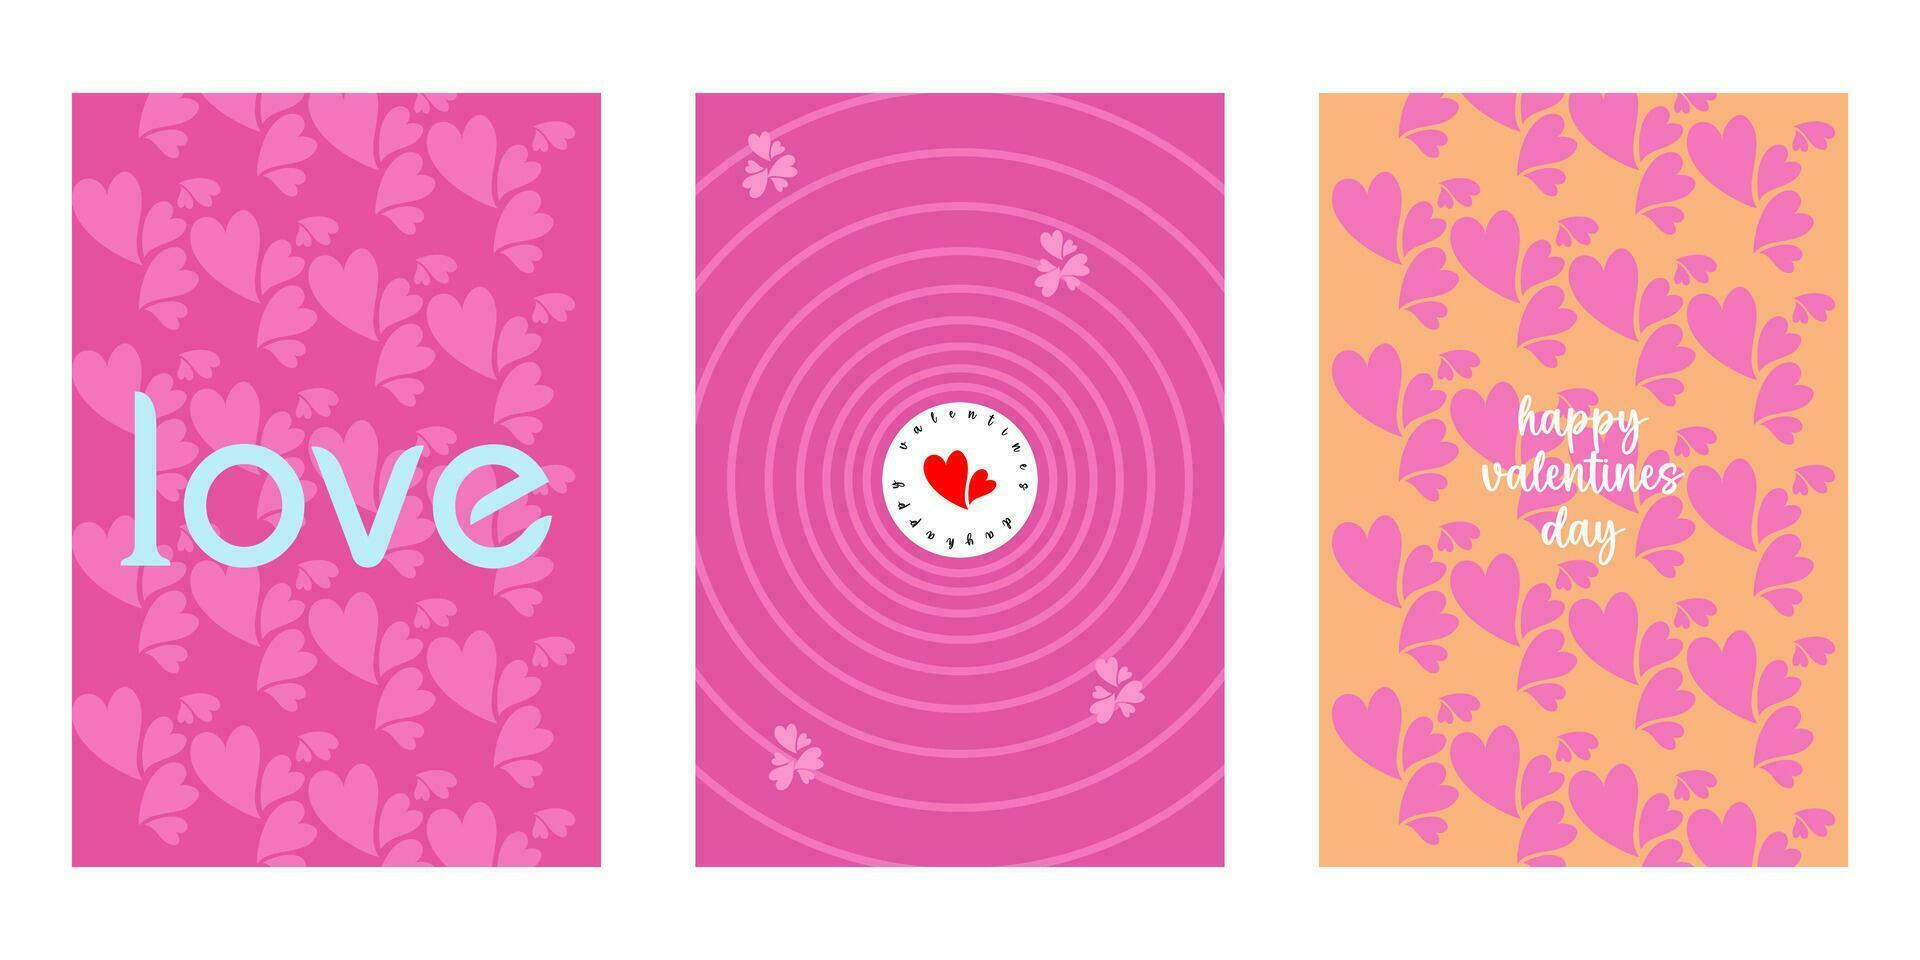 Creative concept of Happy Valentines Day cards set. Modern abstract art design with hearts, geometric and liquid shapes. Templates for celebration, ads, branding, banner, cover, label, poster, sales vector